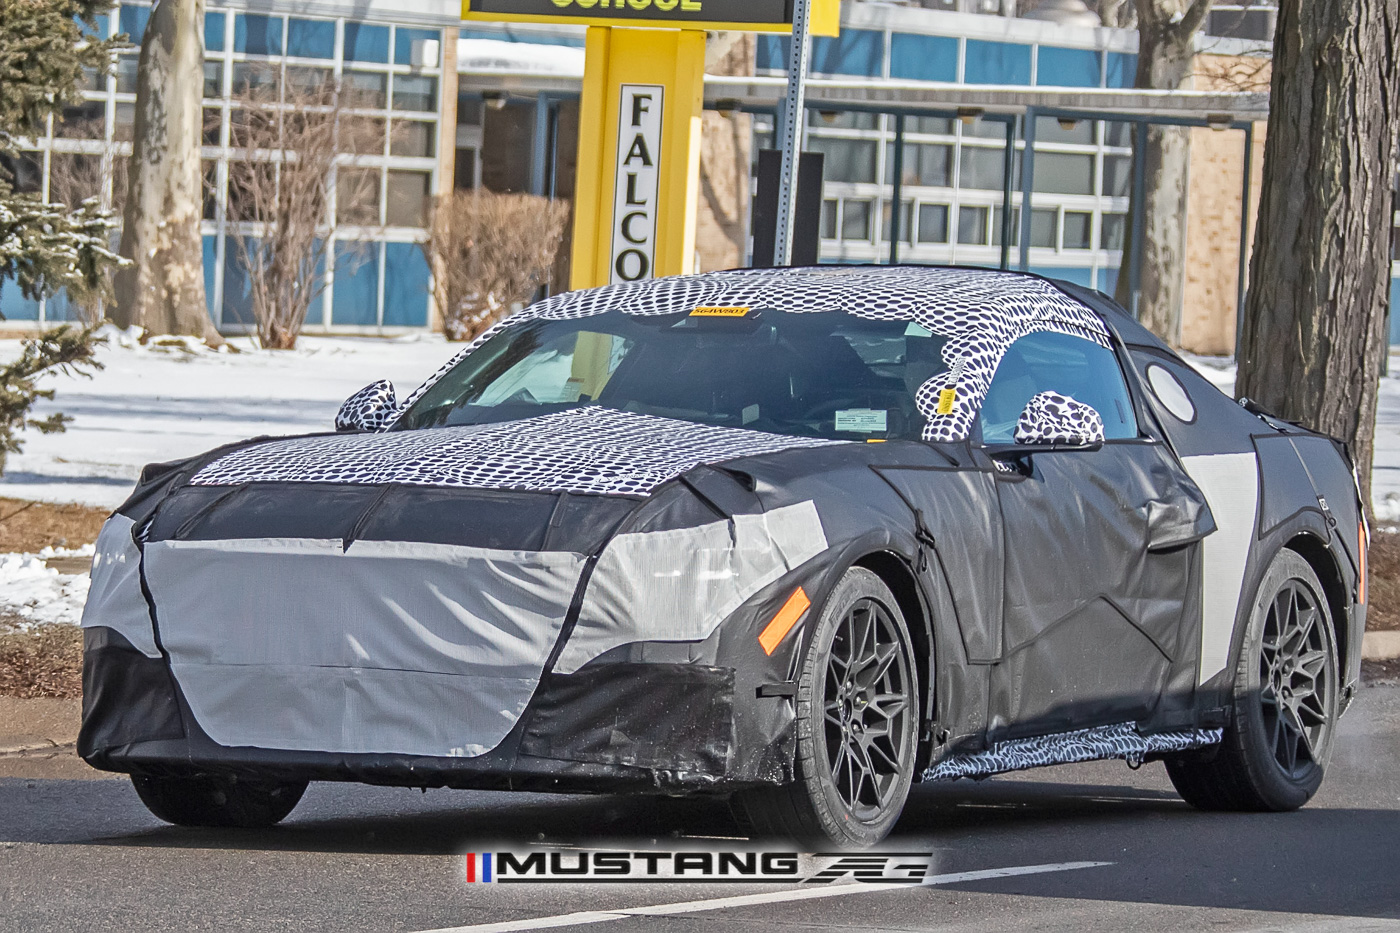 S650 Mustang Spied: New Mustang Prototype w/ Mach 1-Style Wheels, Upgraded Dual Caliper Rear Brakes 📸 s650-mustang-new-mach1-prototype-spied-2